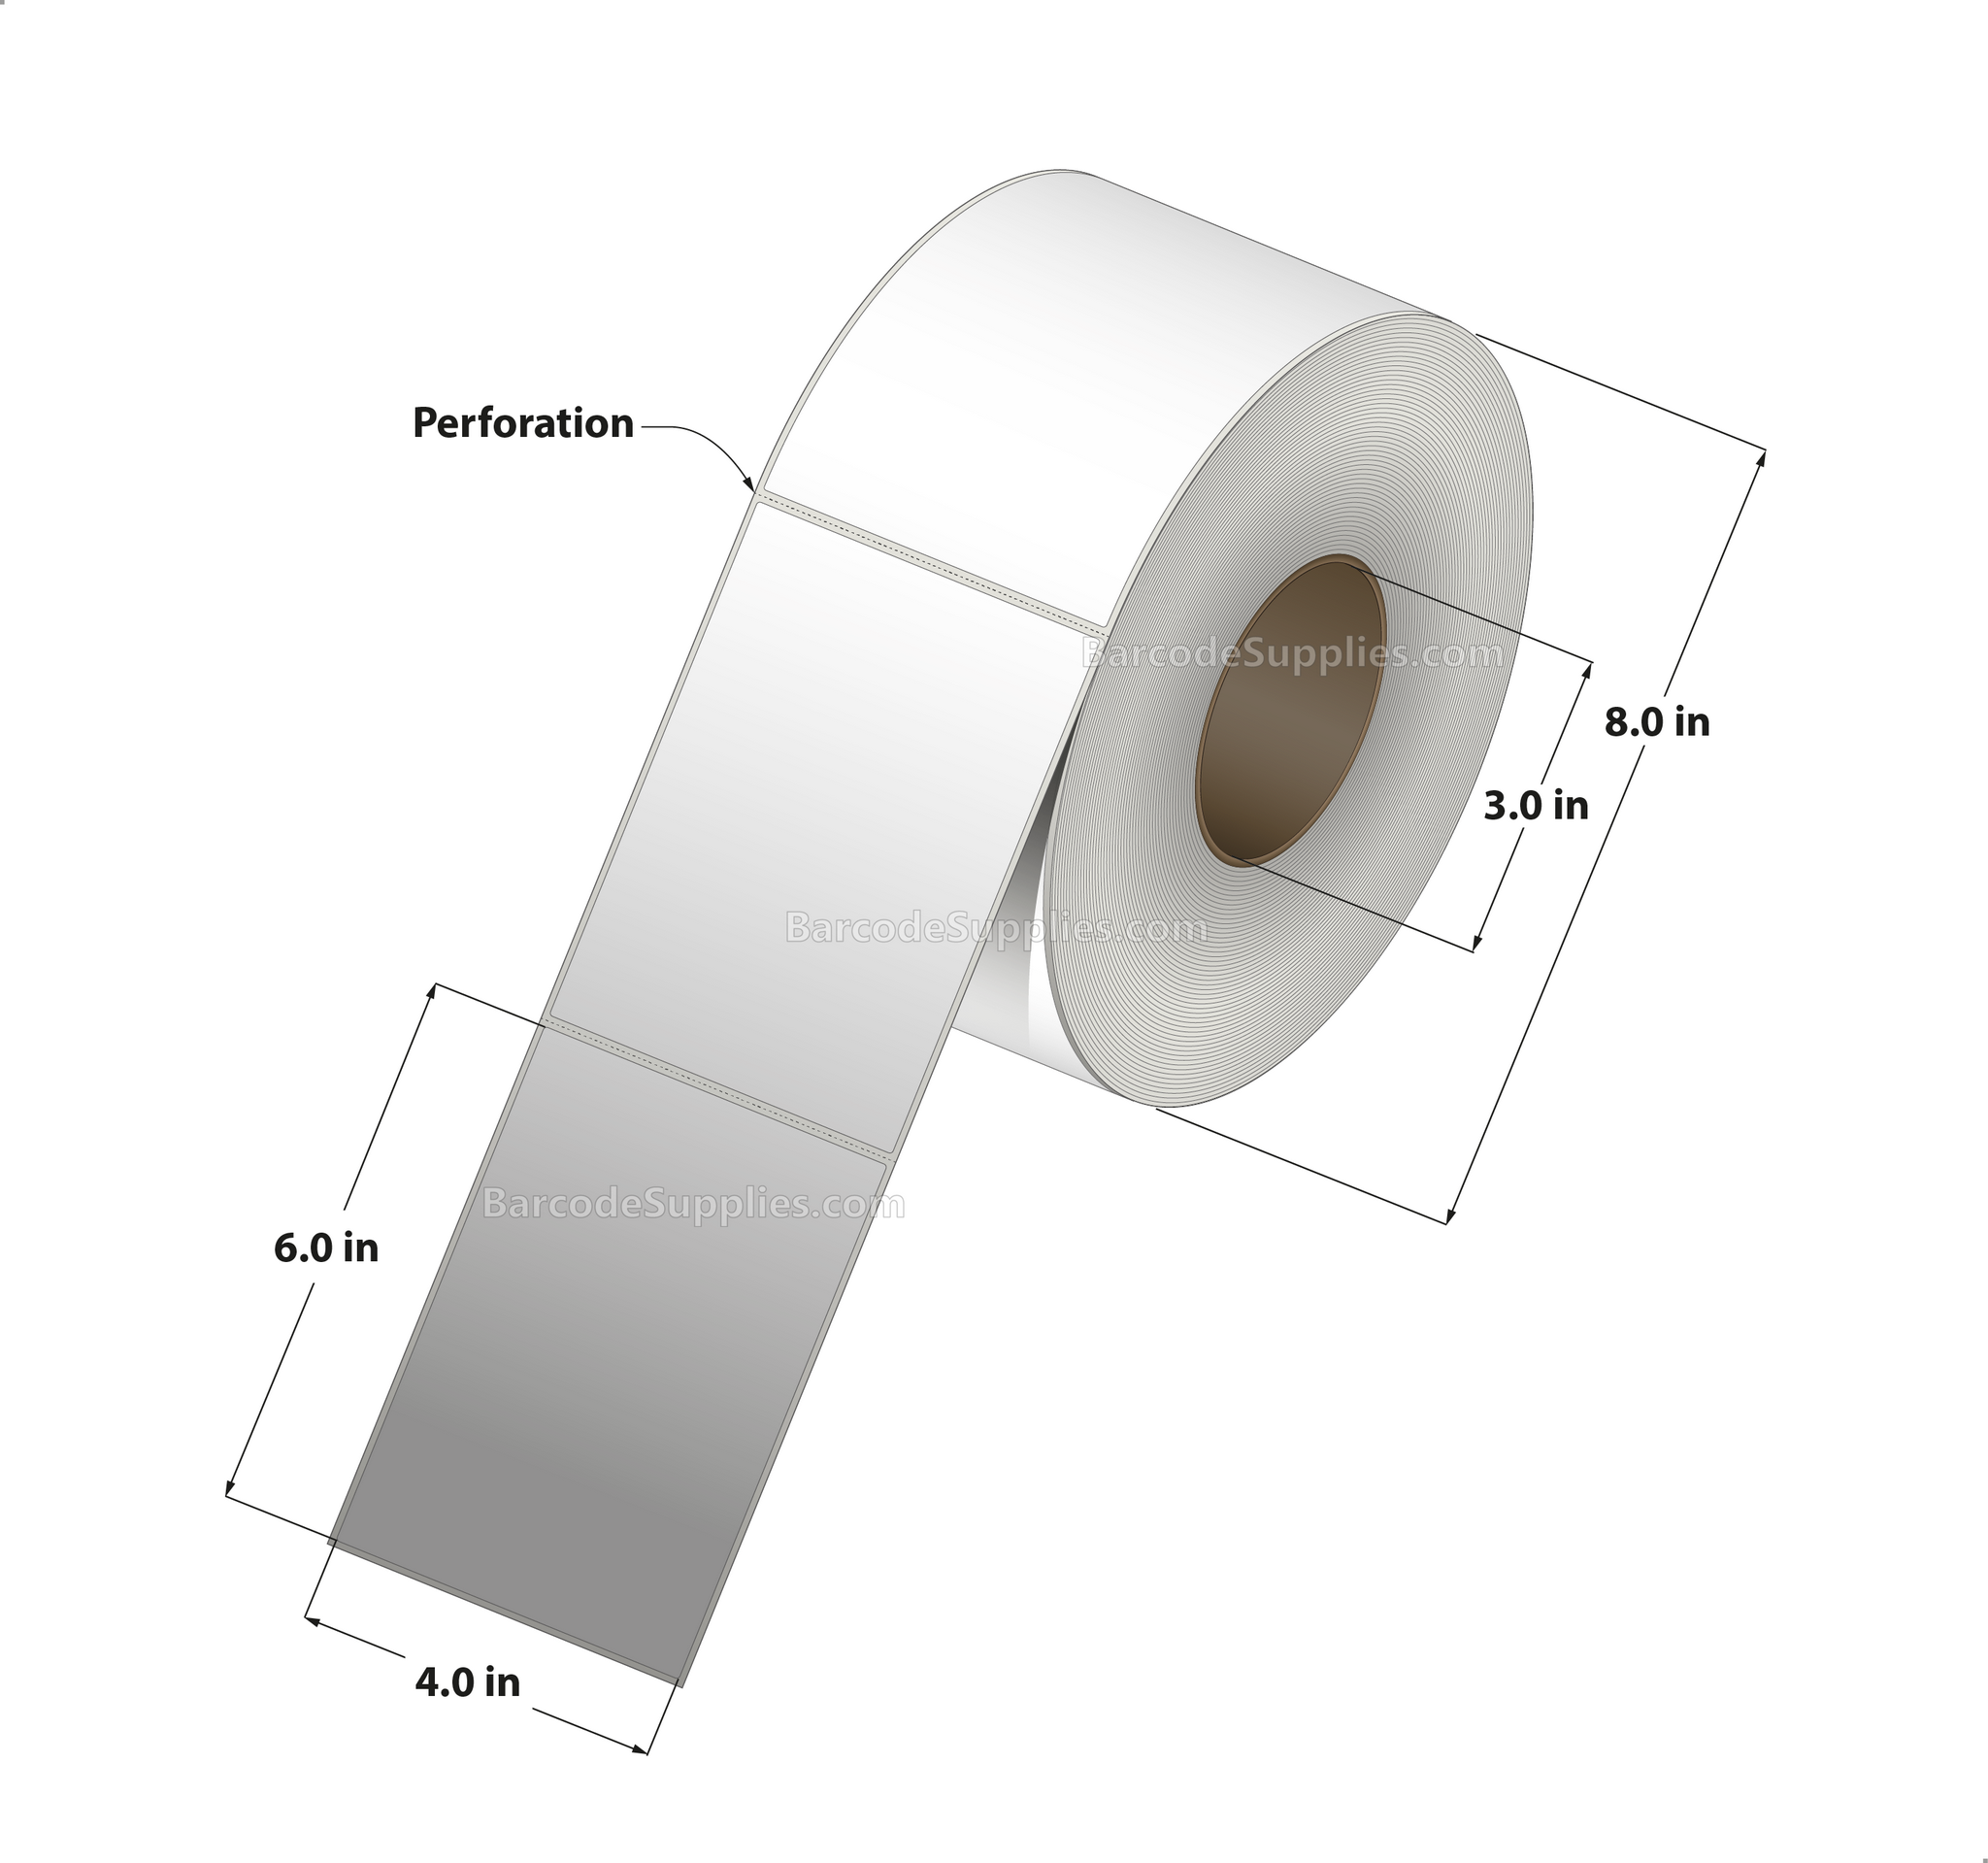 4 x 6 Thermal Transfer White Labels With Permanent Acrylic Adhesive - Perforated - 1000 Labels Per Roll - Carton Of 4 Rolls - 4000 Labels Total - MPN: TH46-1P